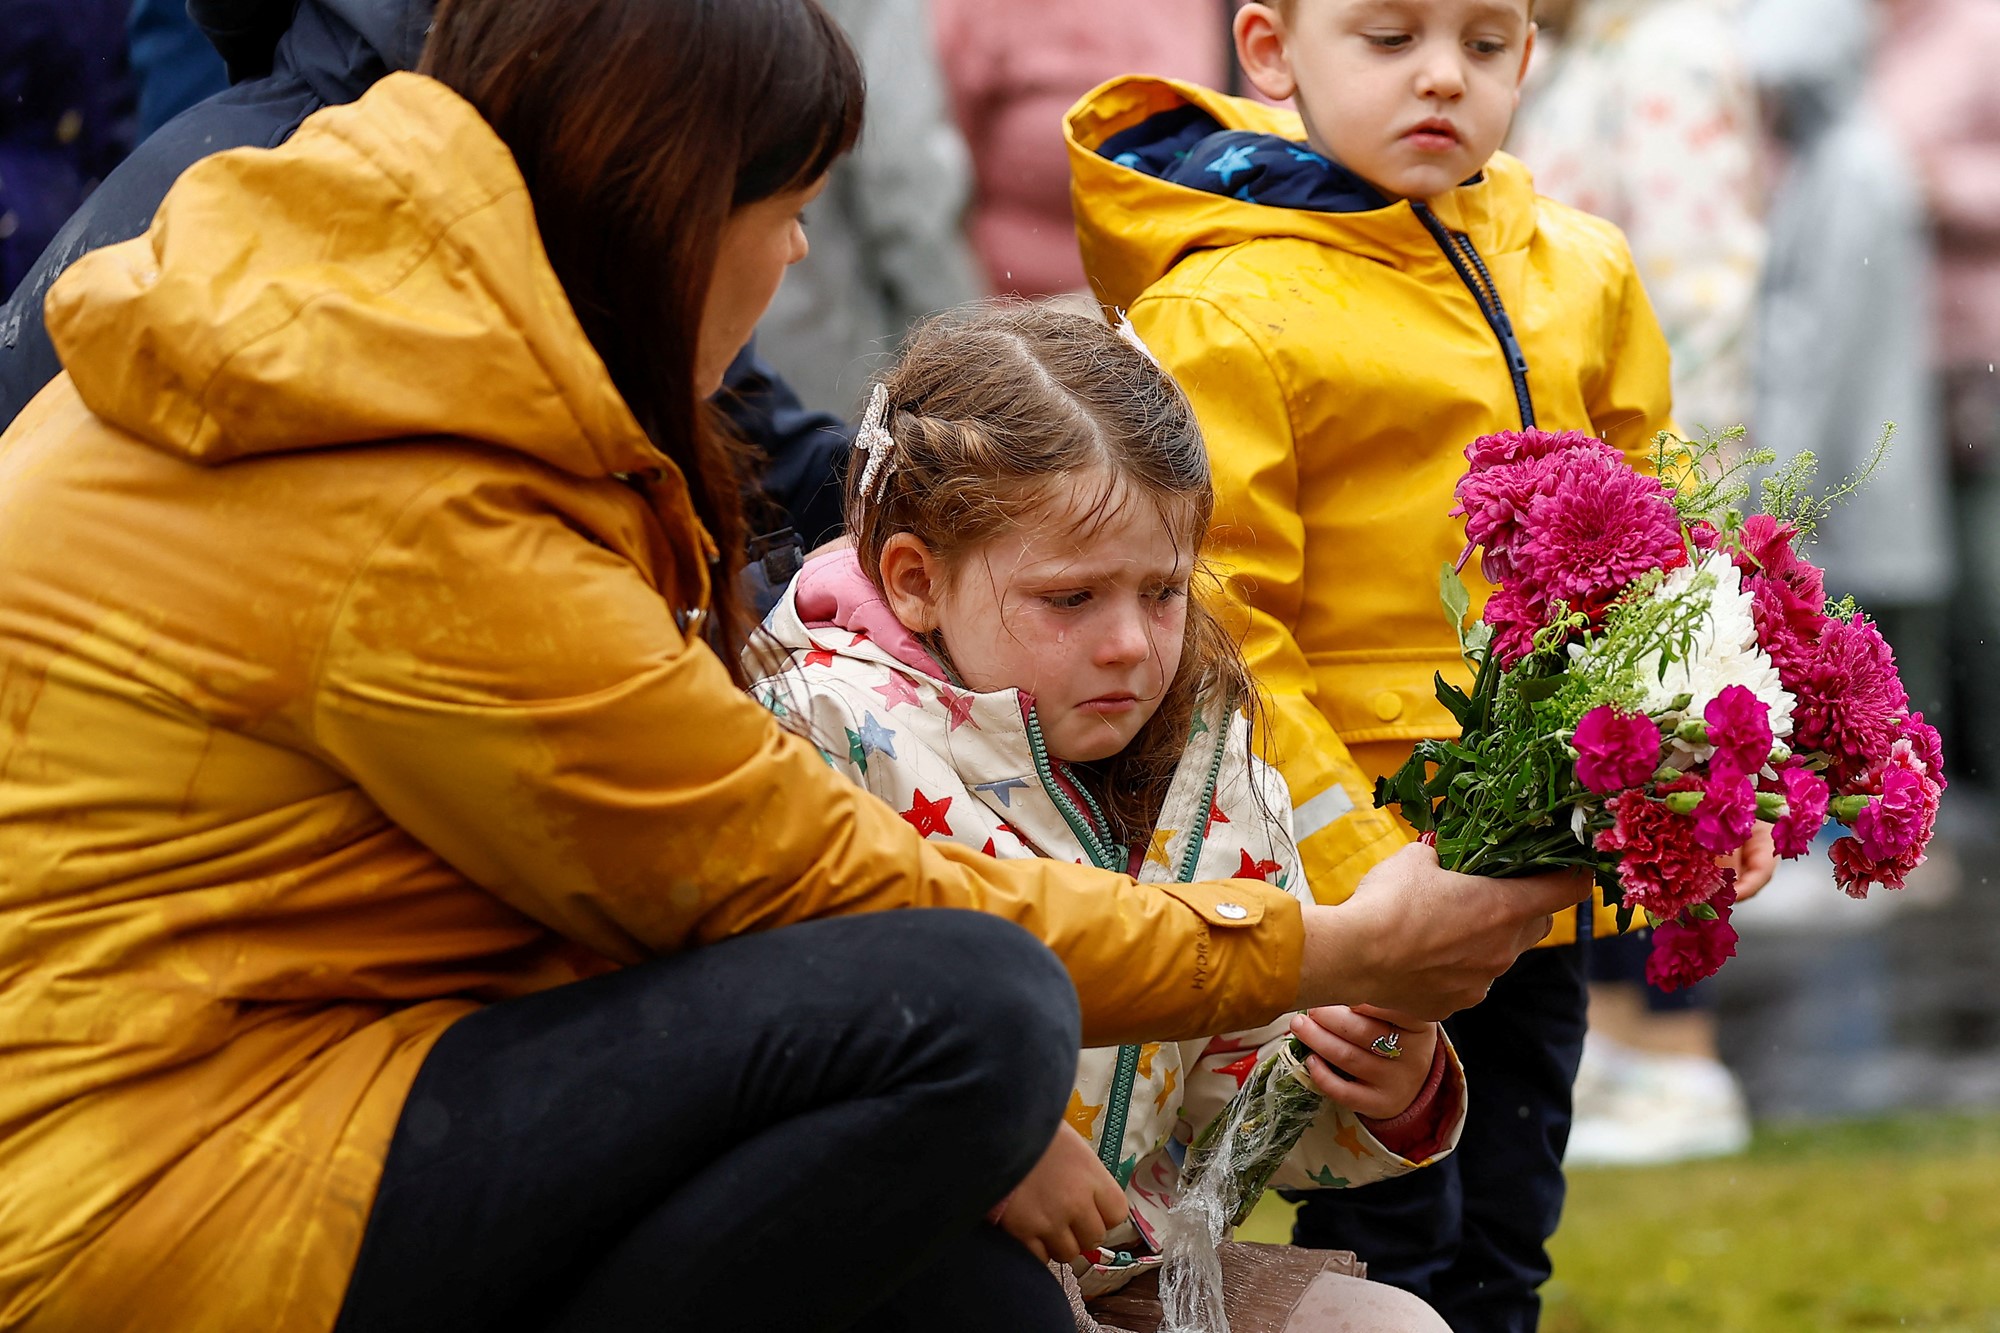 A young girl is pictured with tears in her eyes, putting down flowers with a lady wearing a yellow raincoat.